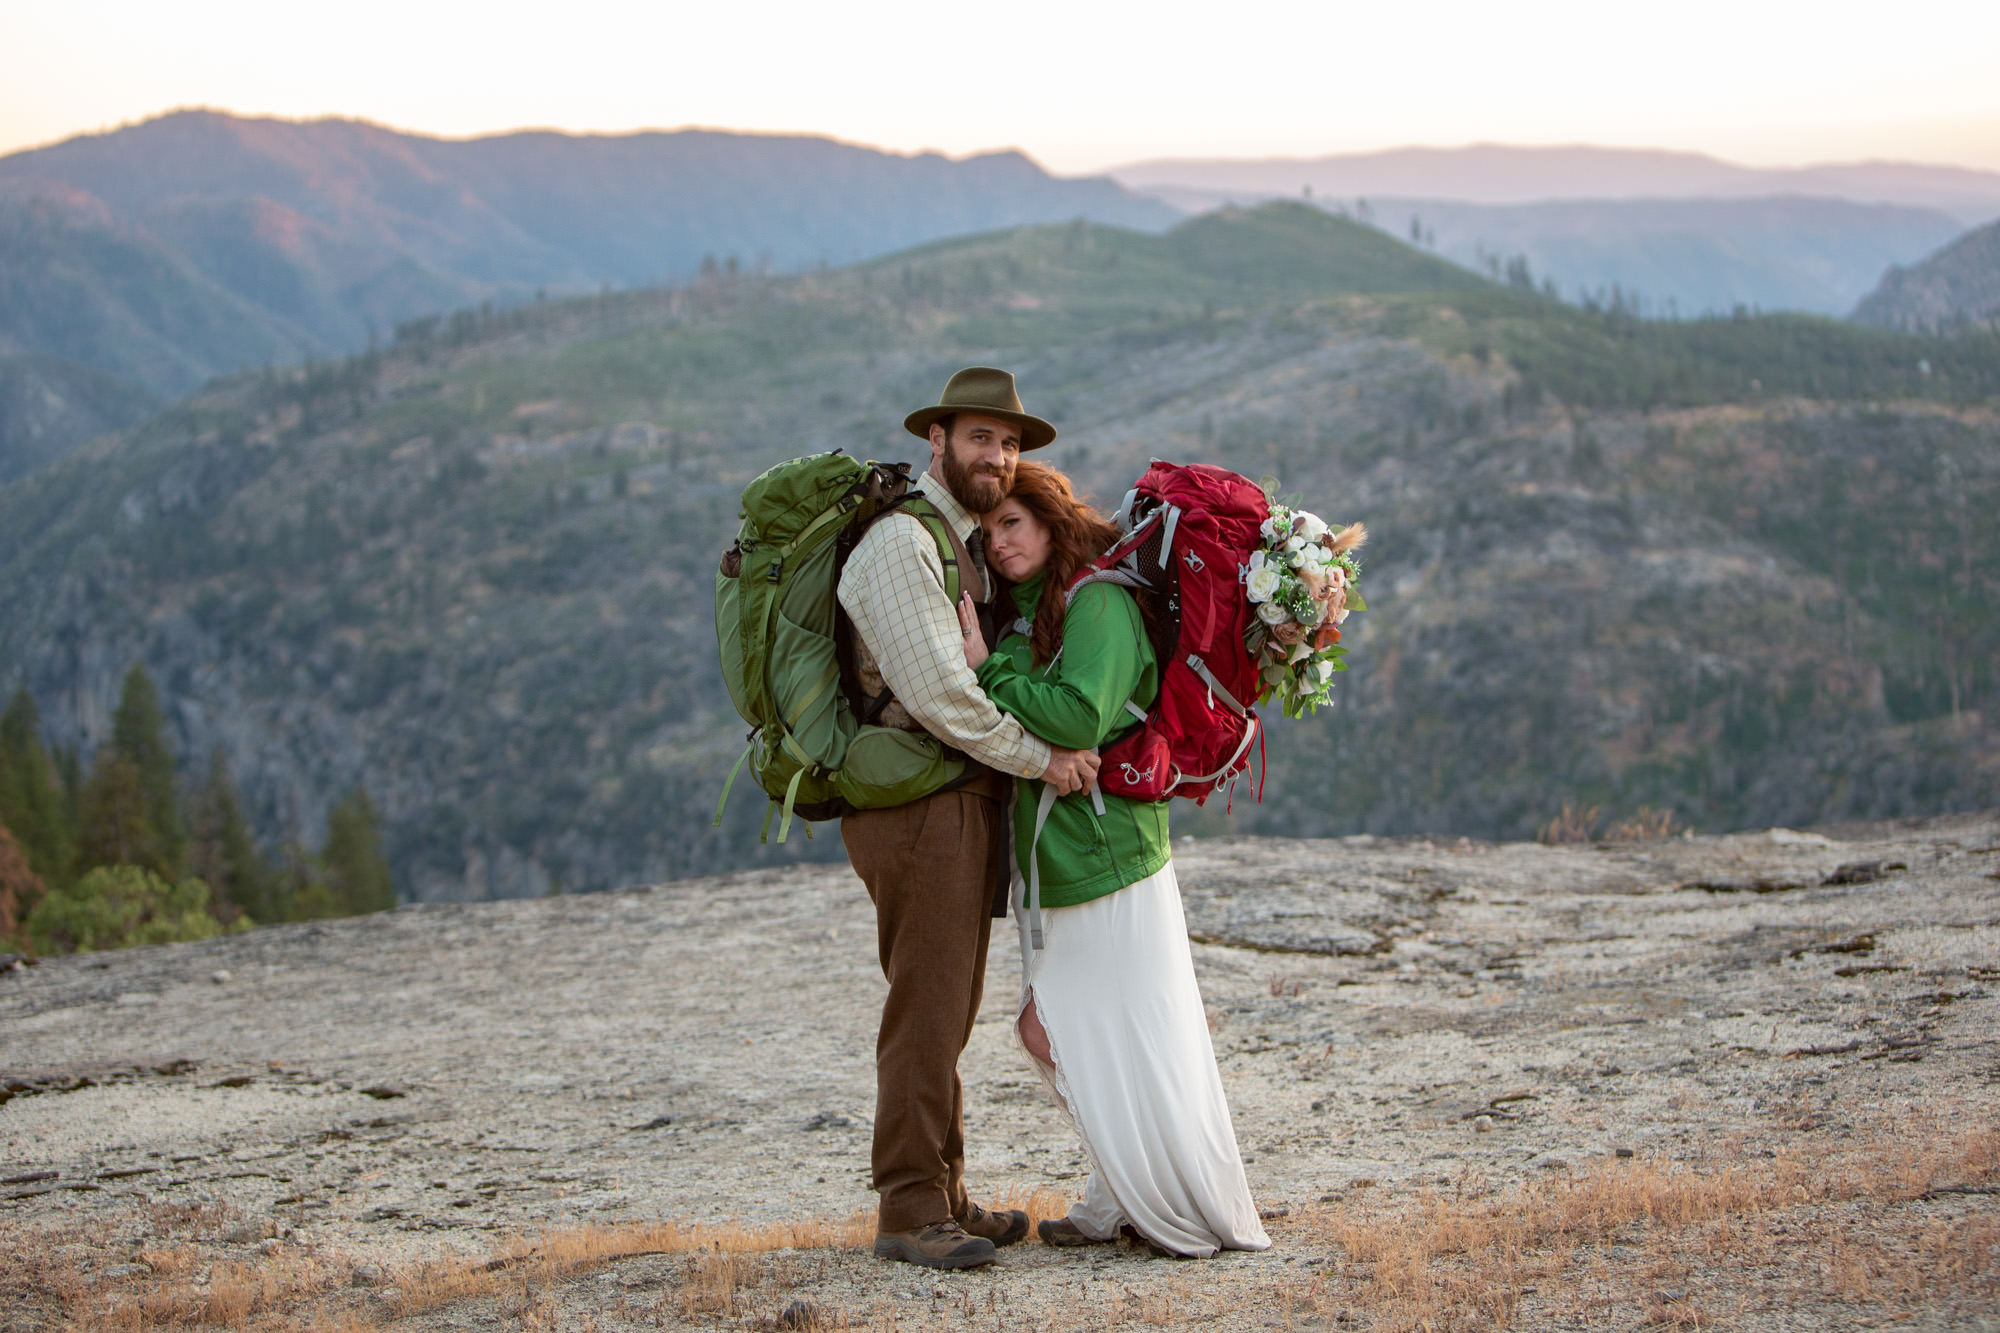 A bride and groom stand together with backpacks as the sunsets after their ceremony where the Yosemite Wedding permits allowed them.